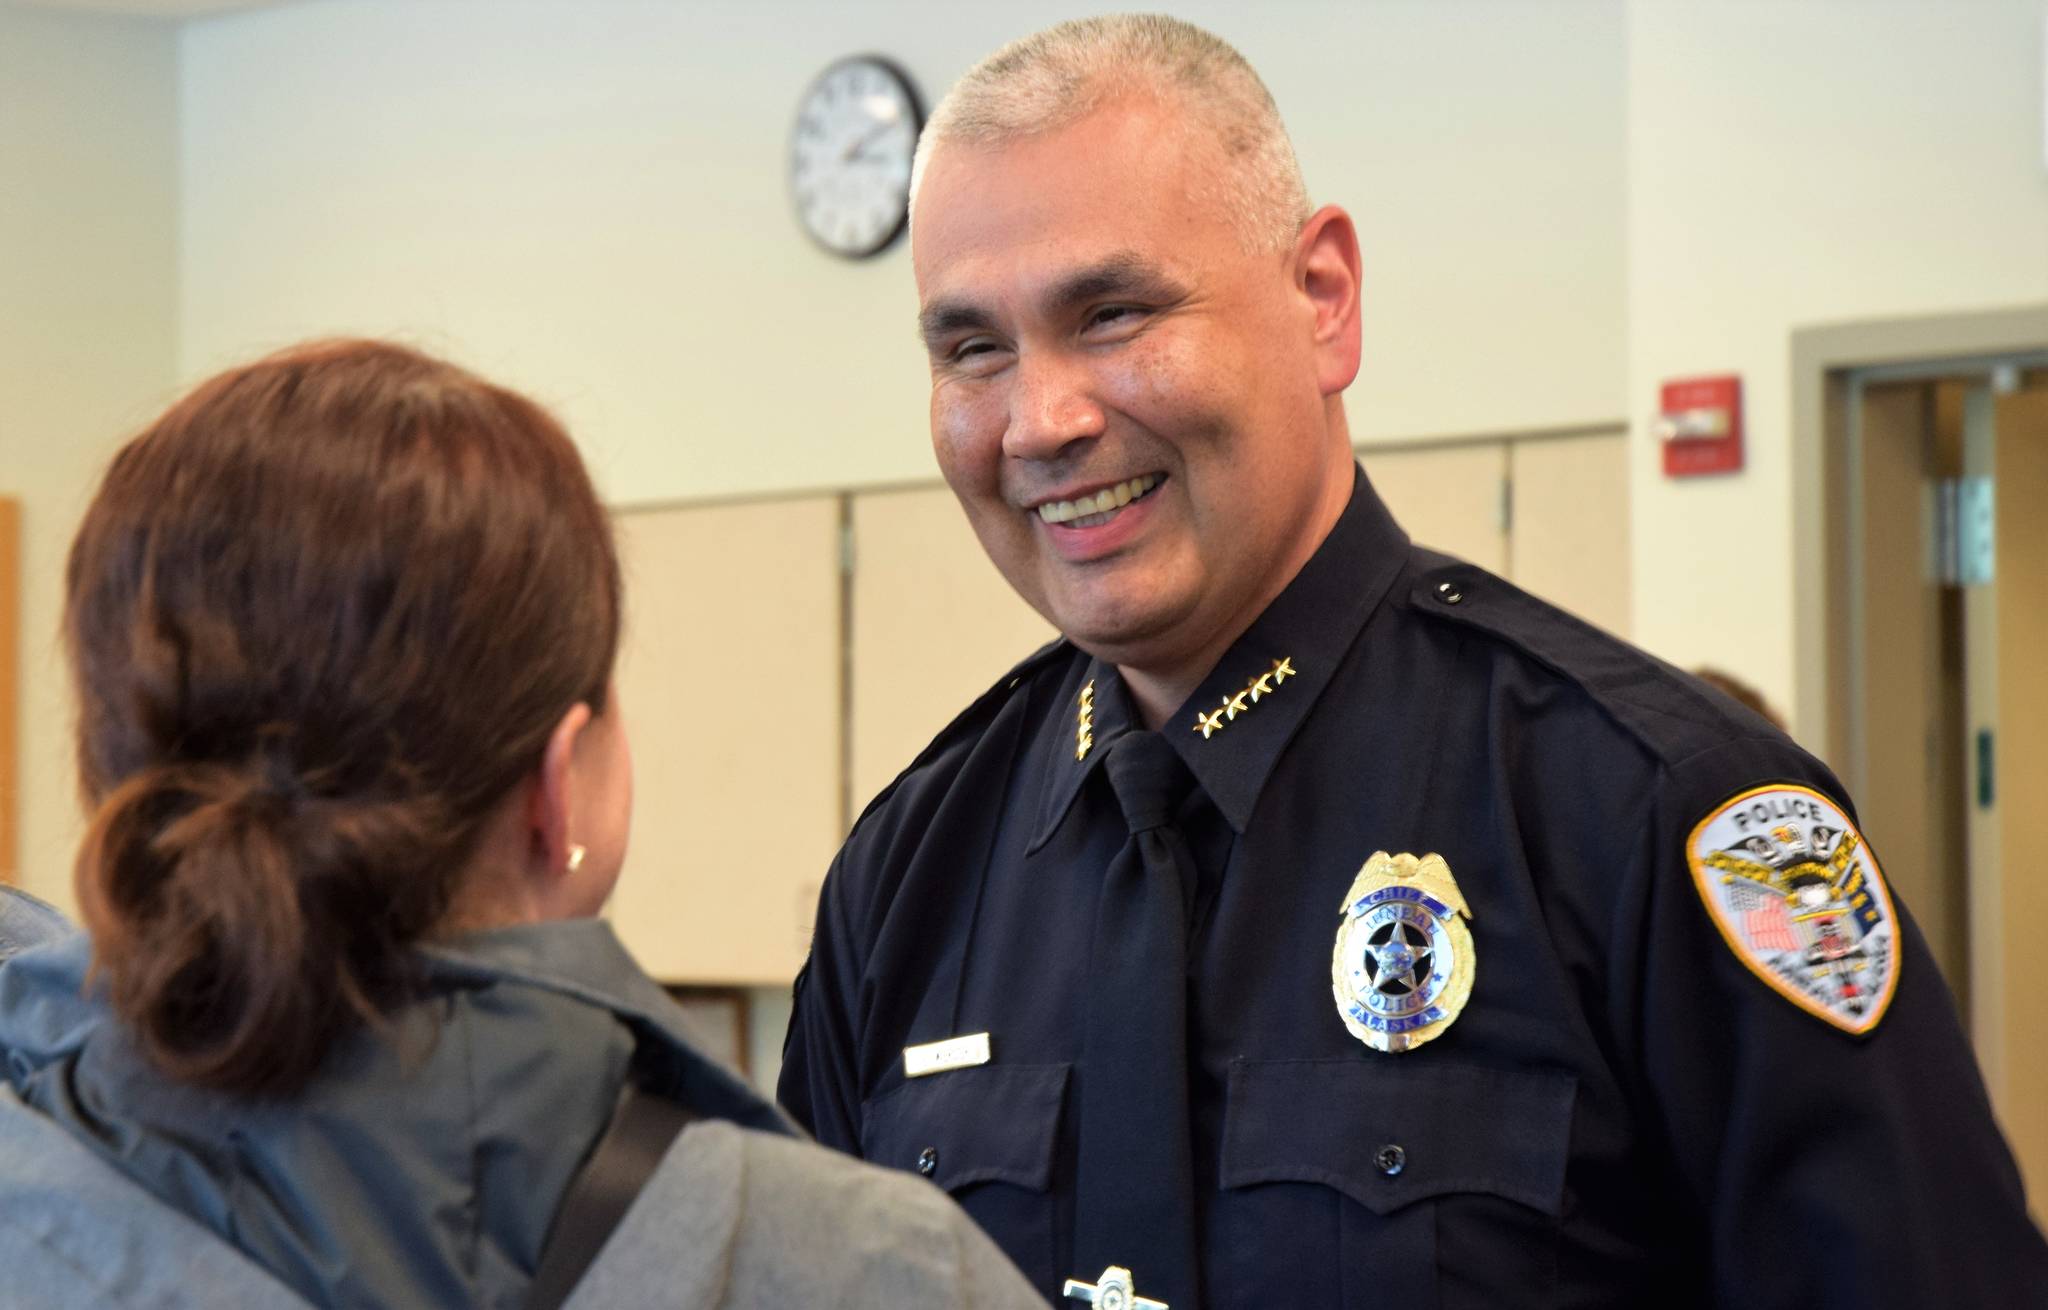 Juneau Police Department Chief Ed Mercer is all smiles while being congratulated by District Attorney Angie Kemp after his swearing-in Monday, July 31. (Liz Kellar | Juneau Empire File)